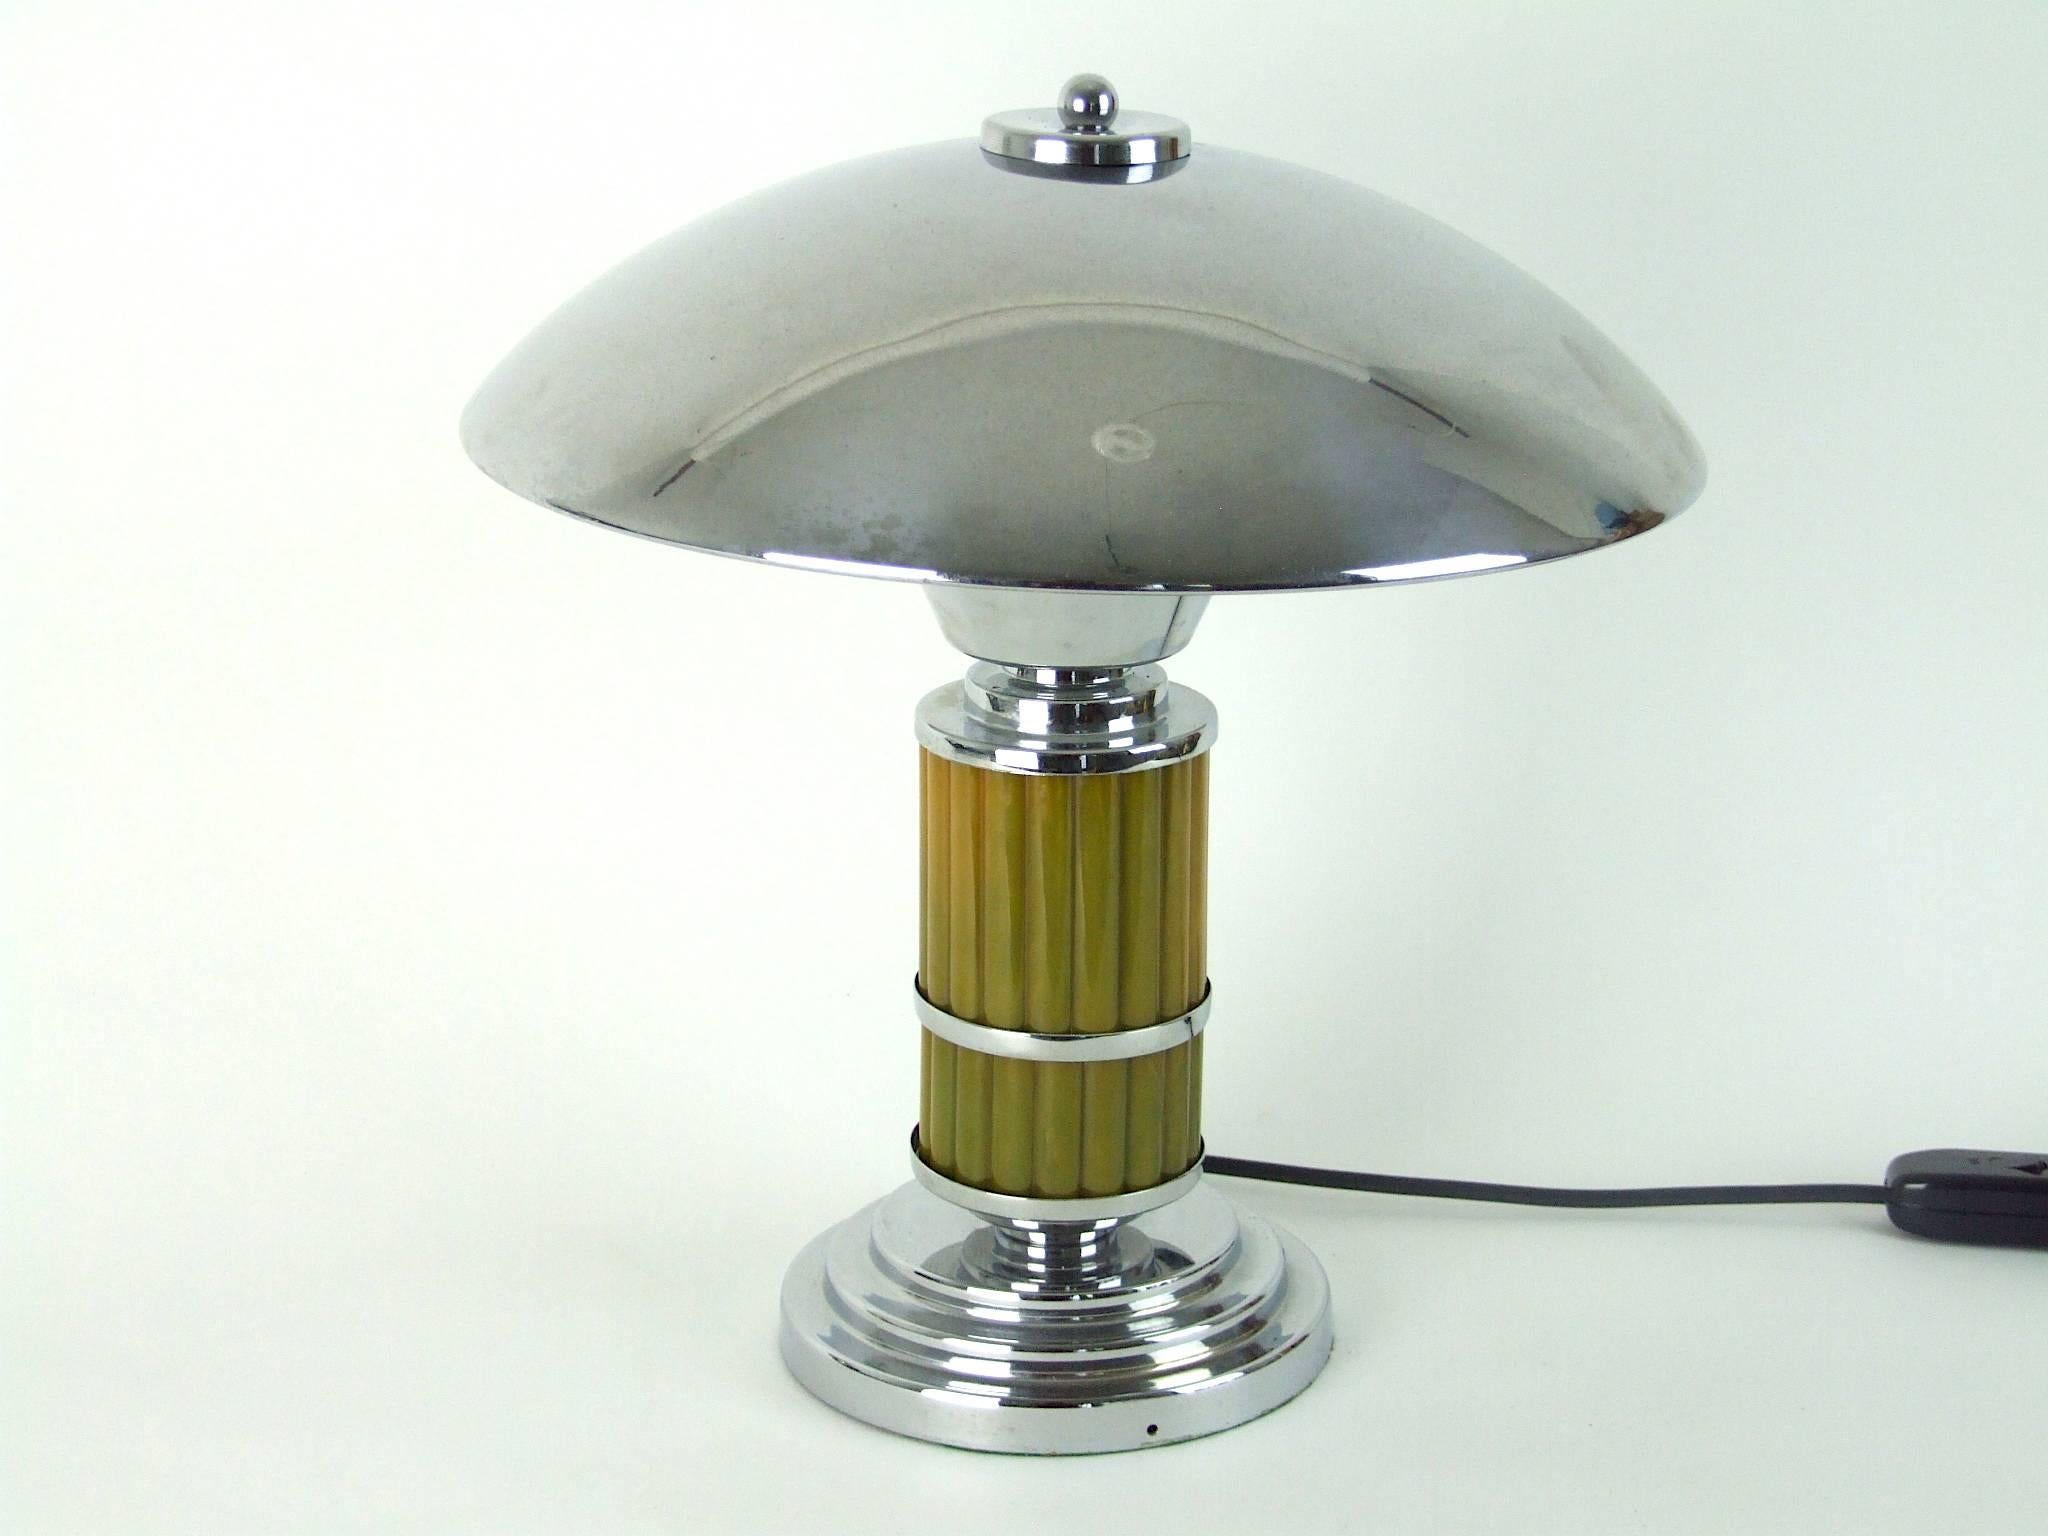 Modernist Art Deco Desk Lamp In Excellent Condition For Sale In Warlingham, GB